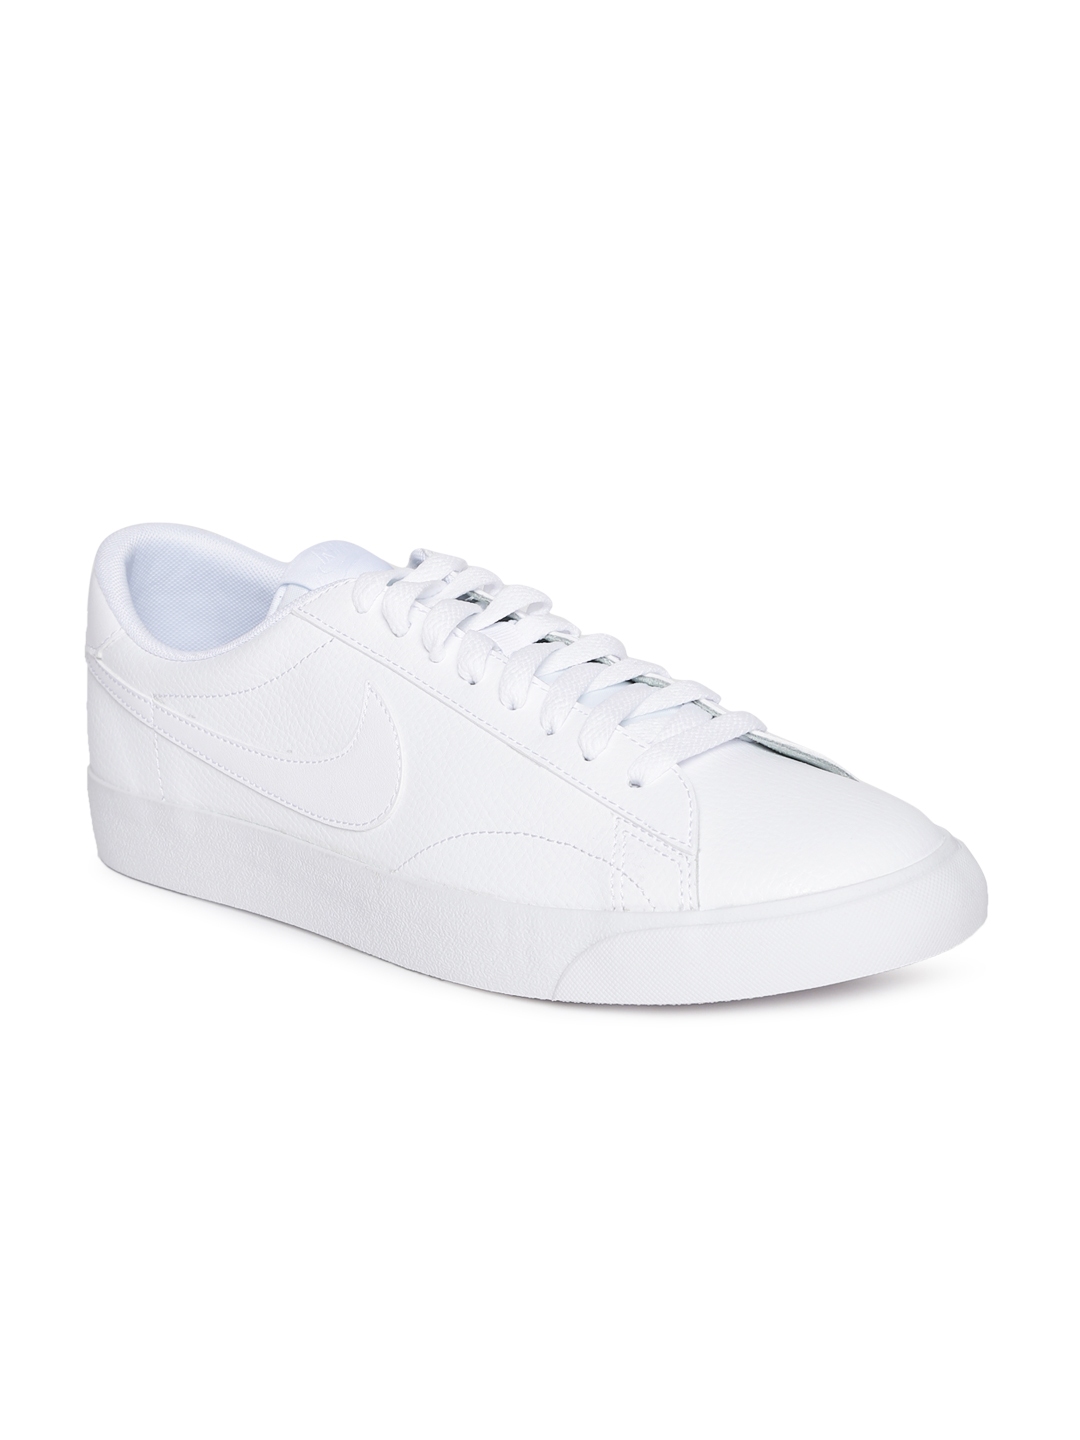 Buy Nike Men White CLASSIC AC Sneakers - Casual Shoes for Men 2314757 ...